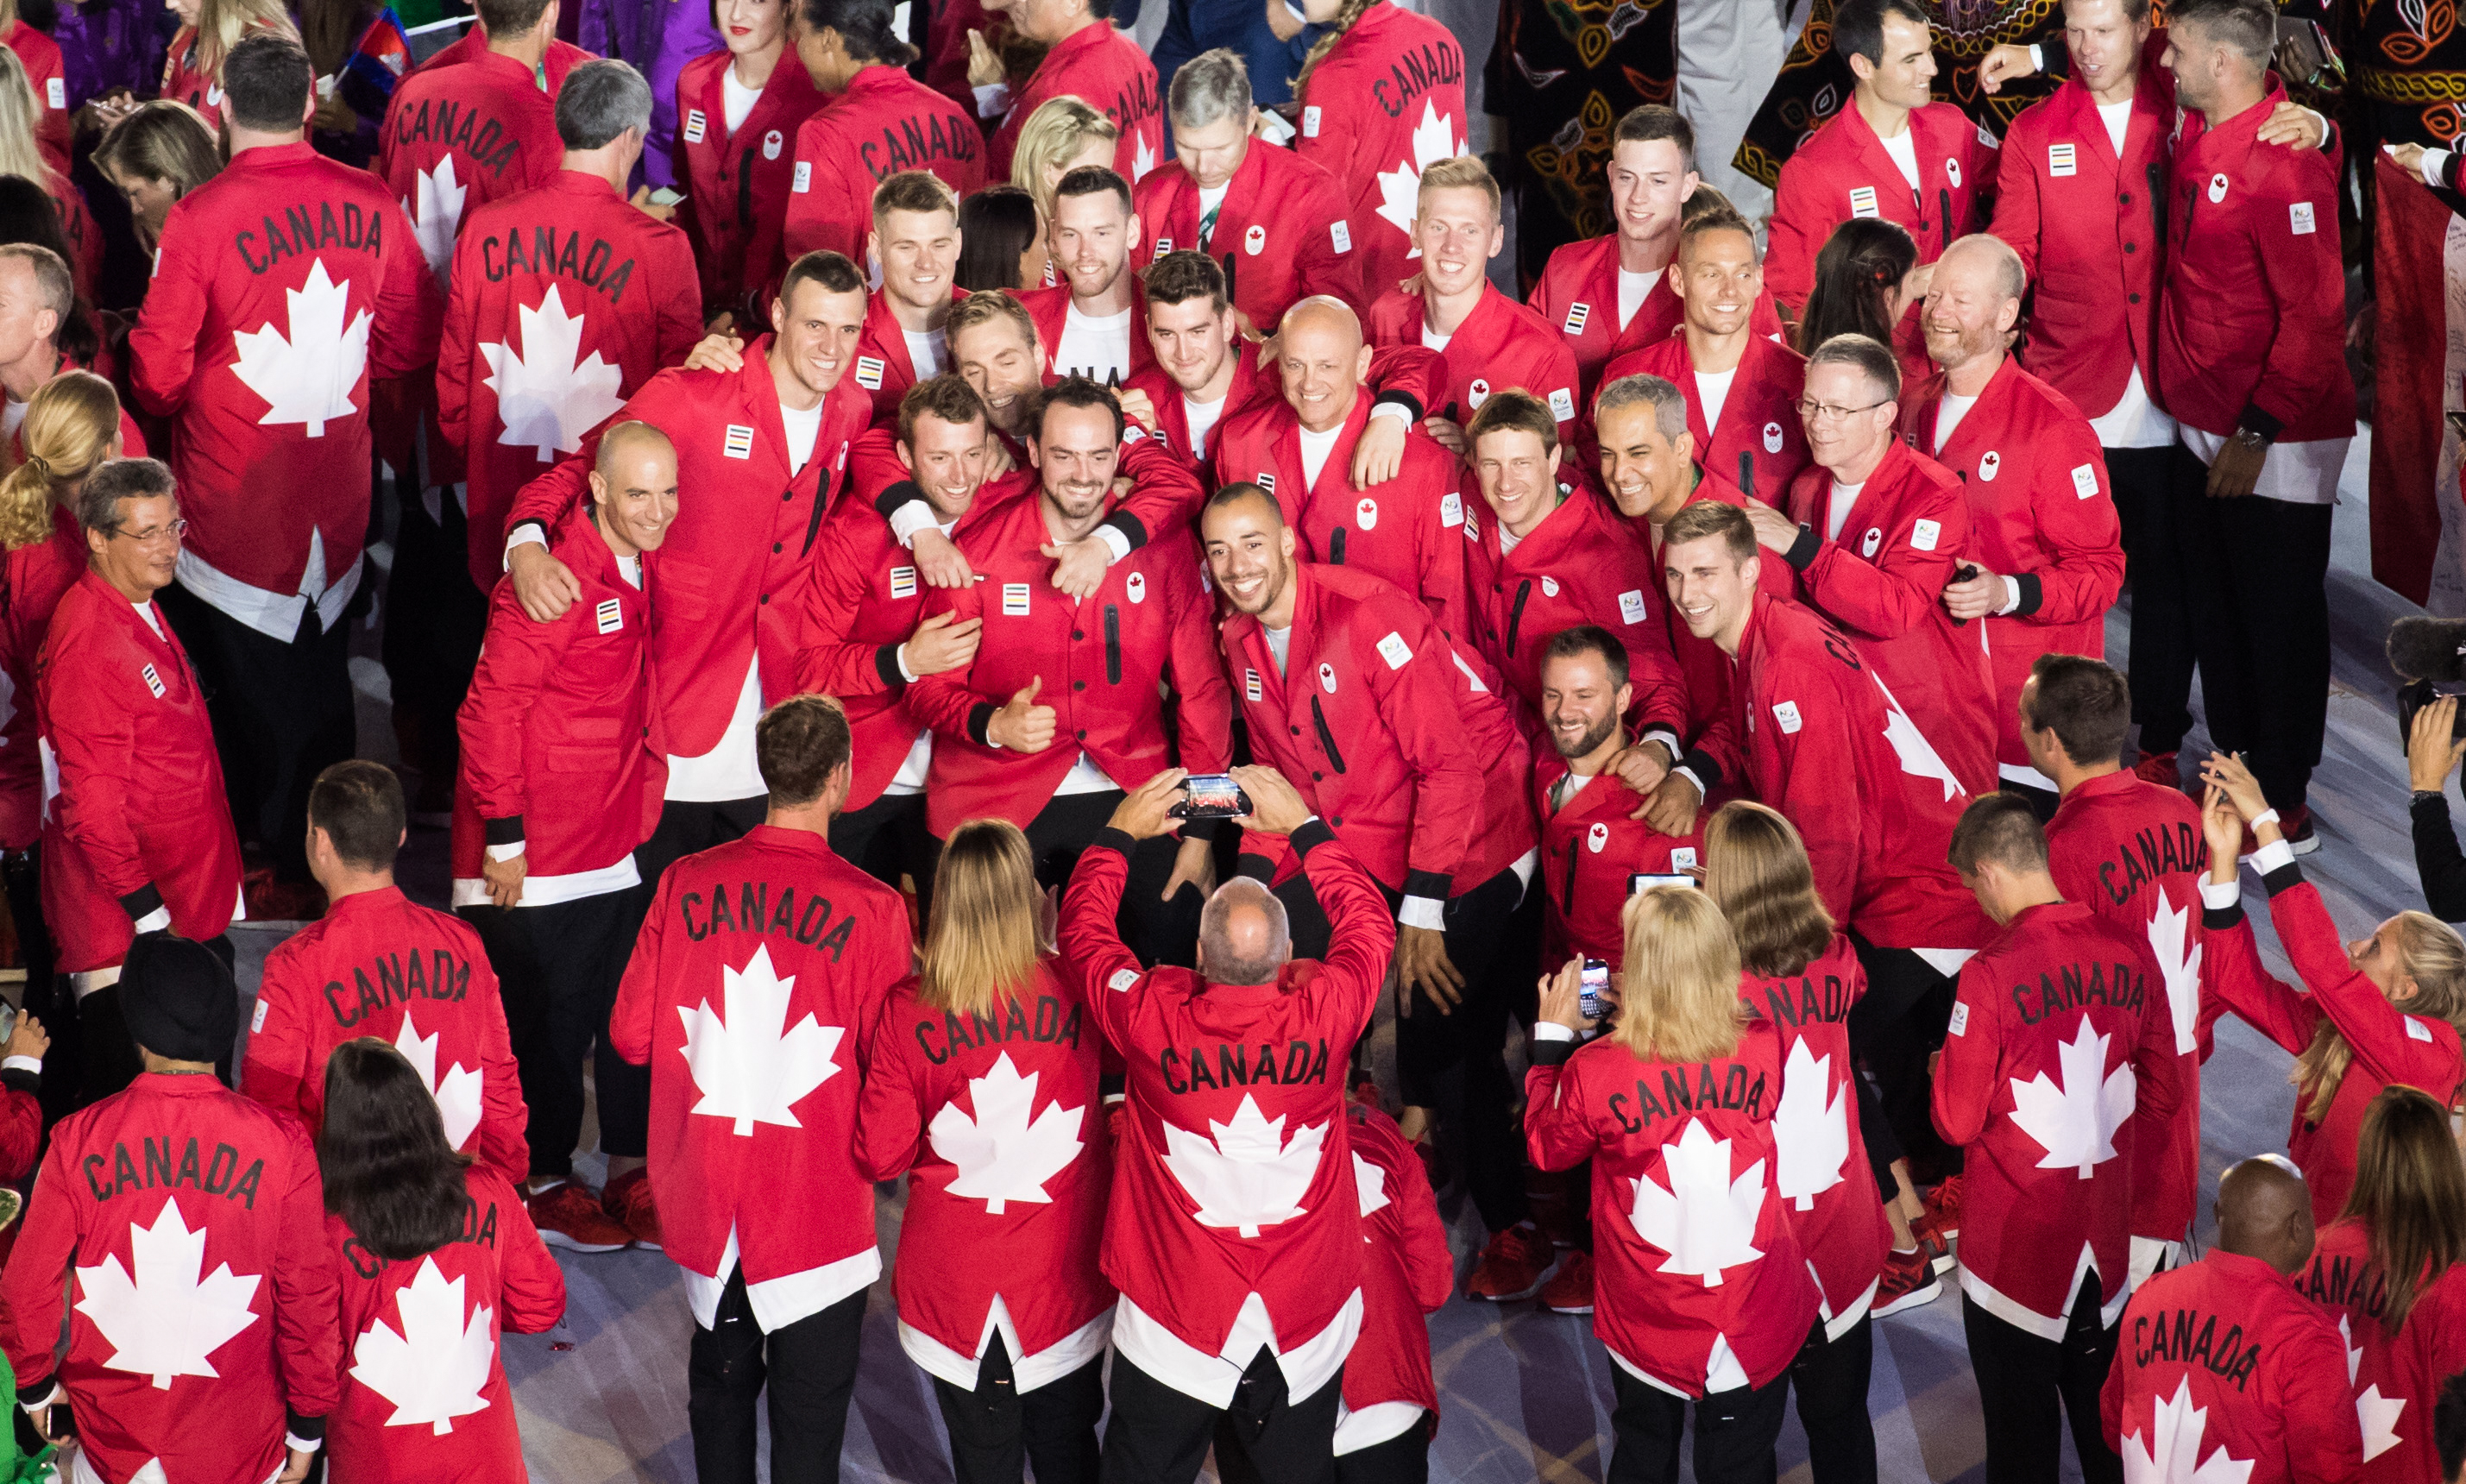 Team Canada Athletes pose for pictures at the opening ceremonies in Rio 2016